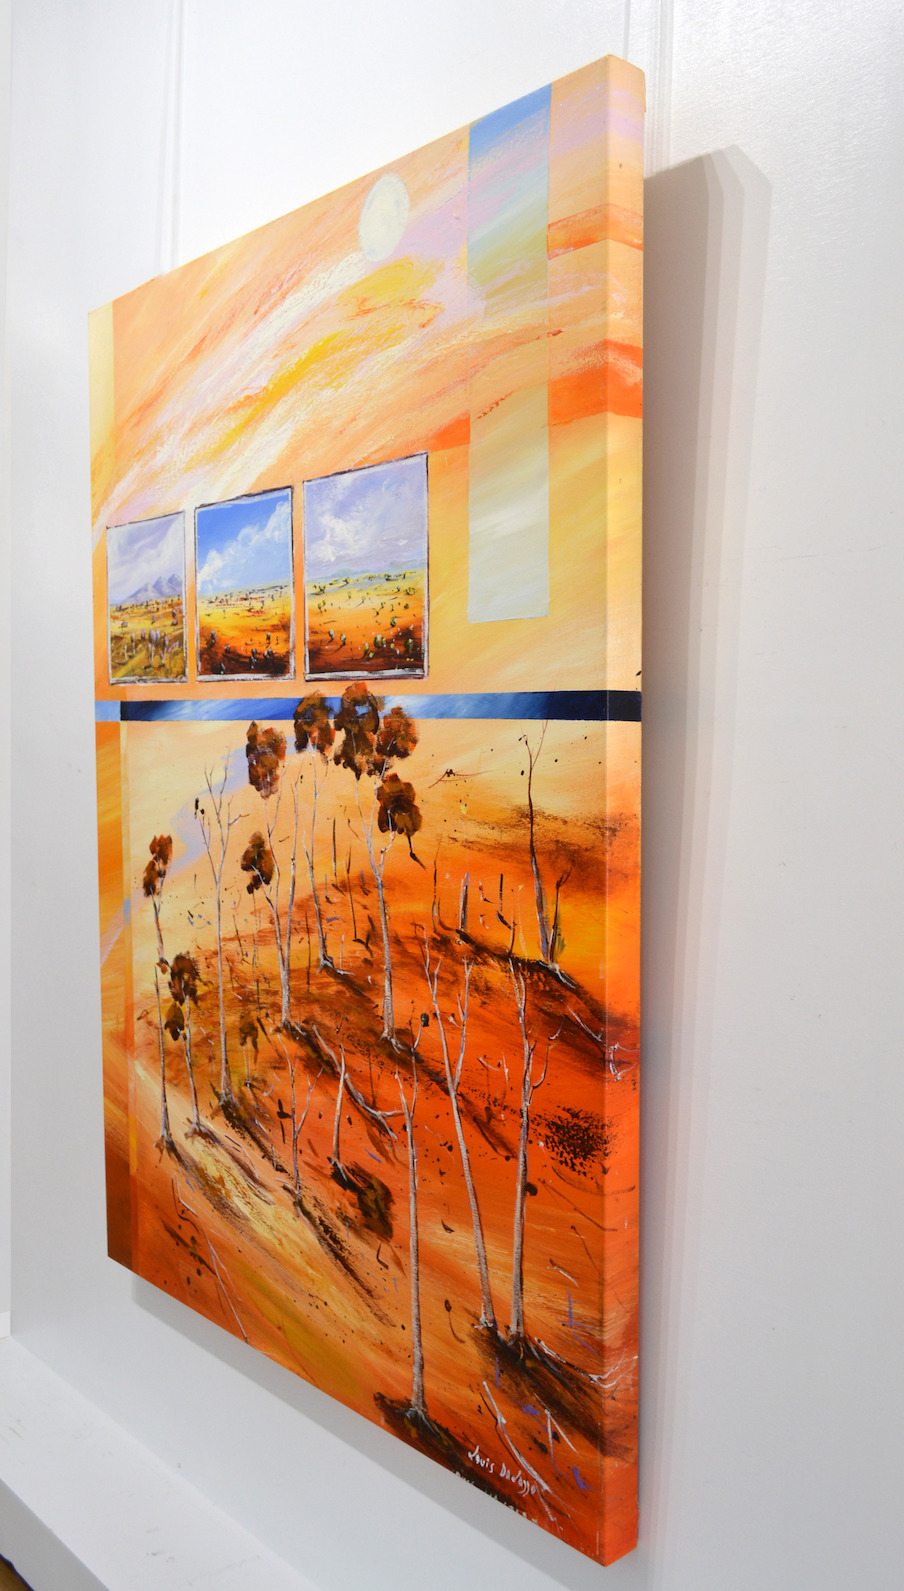 Side View Of Landscape Painting "Land of Far Horizons" By Louis Dalozzo